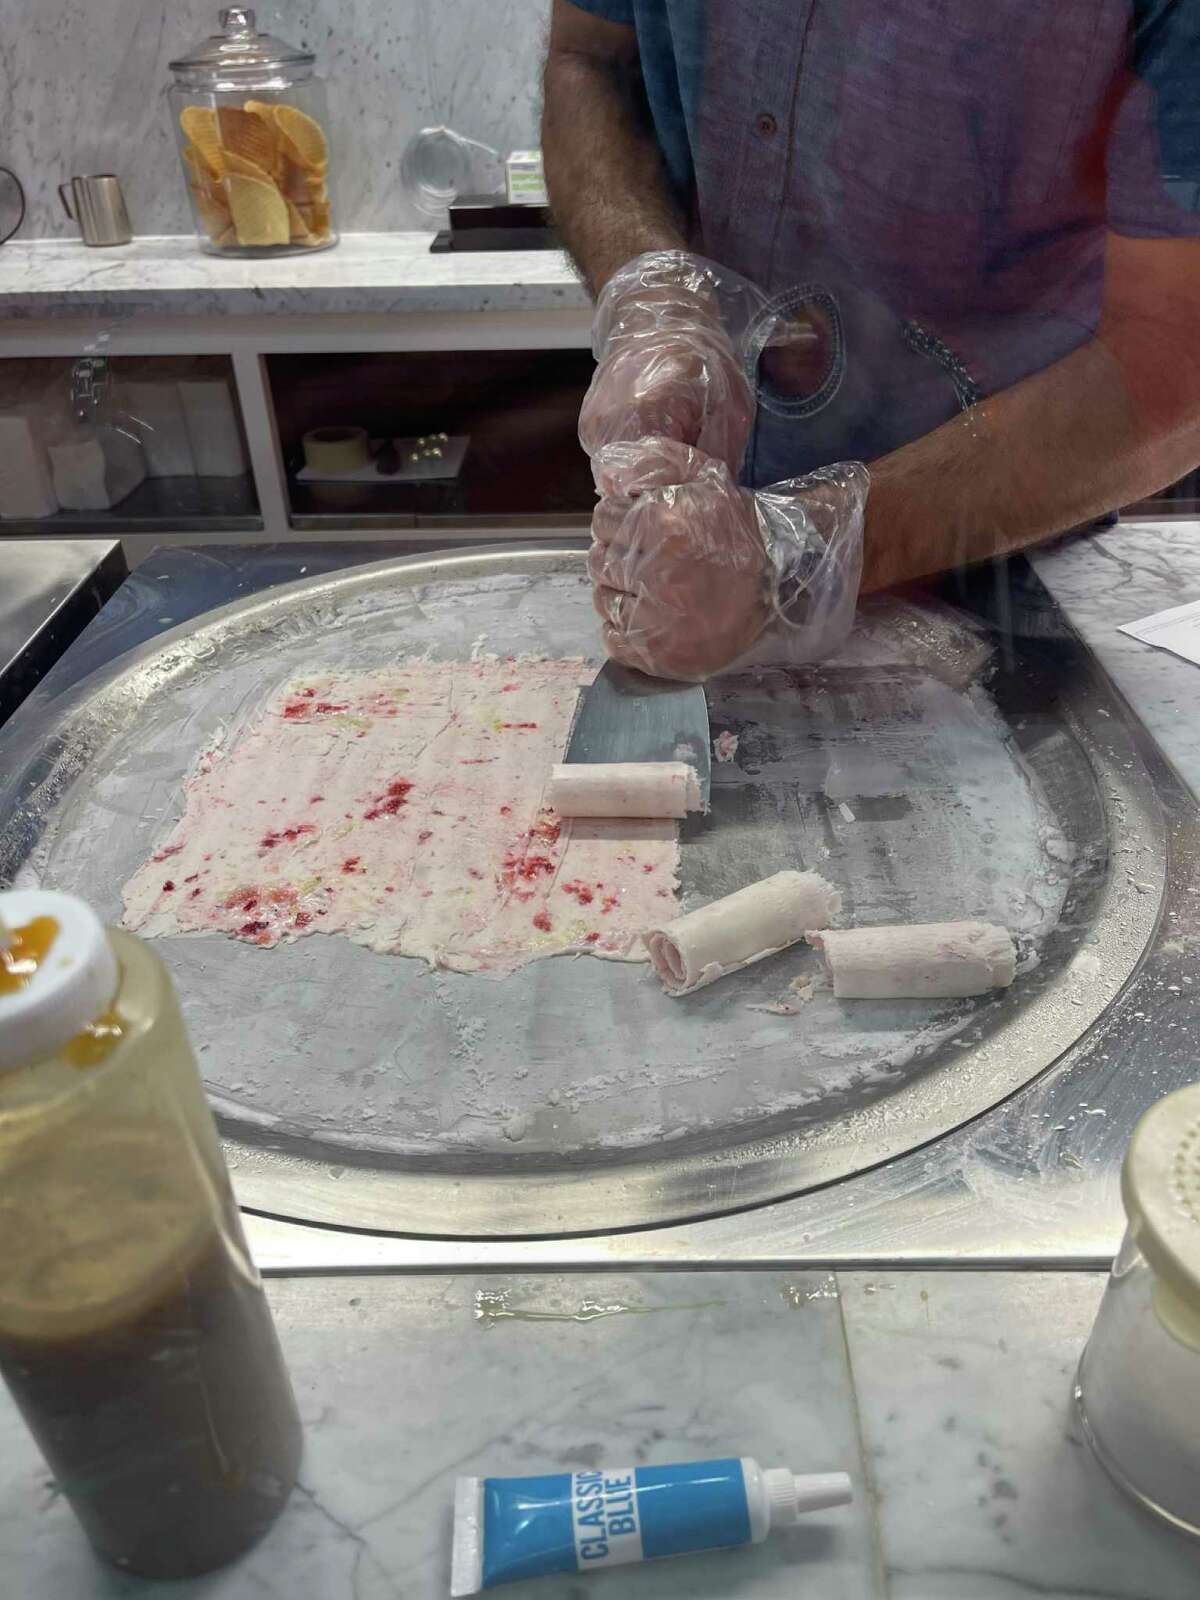 Michael Cordray turns liquid ice cream base into rolls of ice cream infused with banana and strawberries at the Galveston ice cream store he and his wife Ashley have opened.